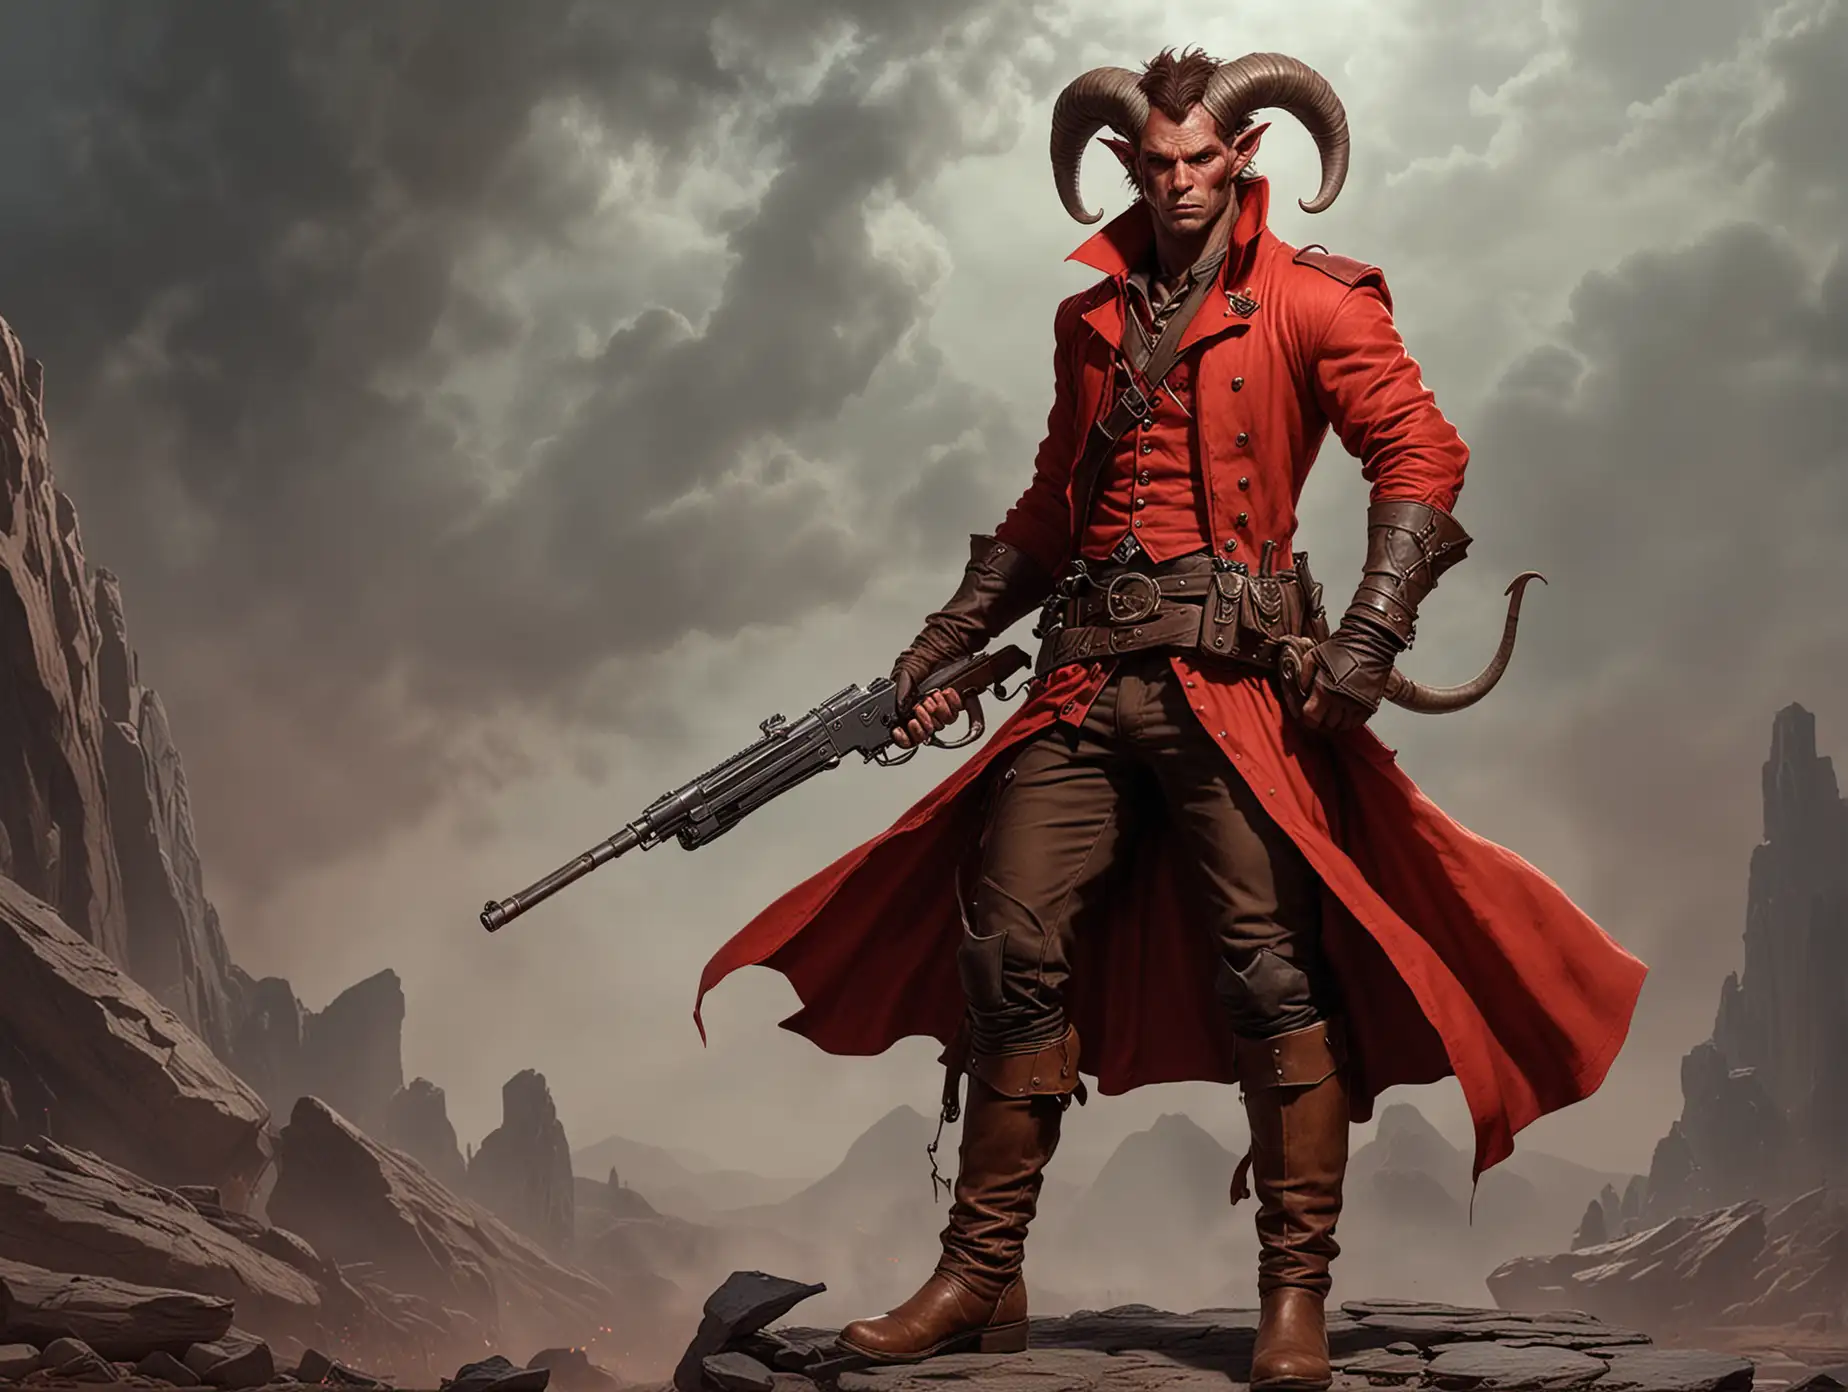 Tiefling-Man-in-Red-Clothes-with-Big-Gun